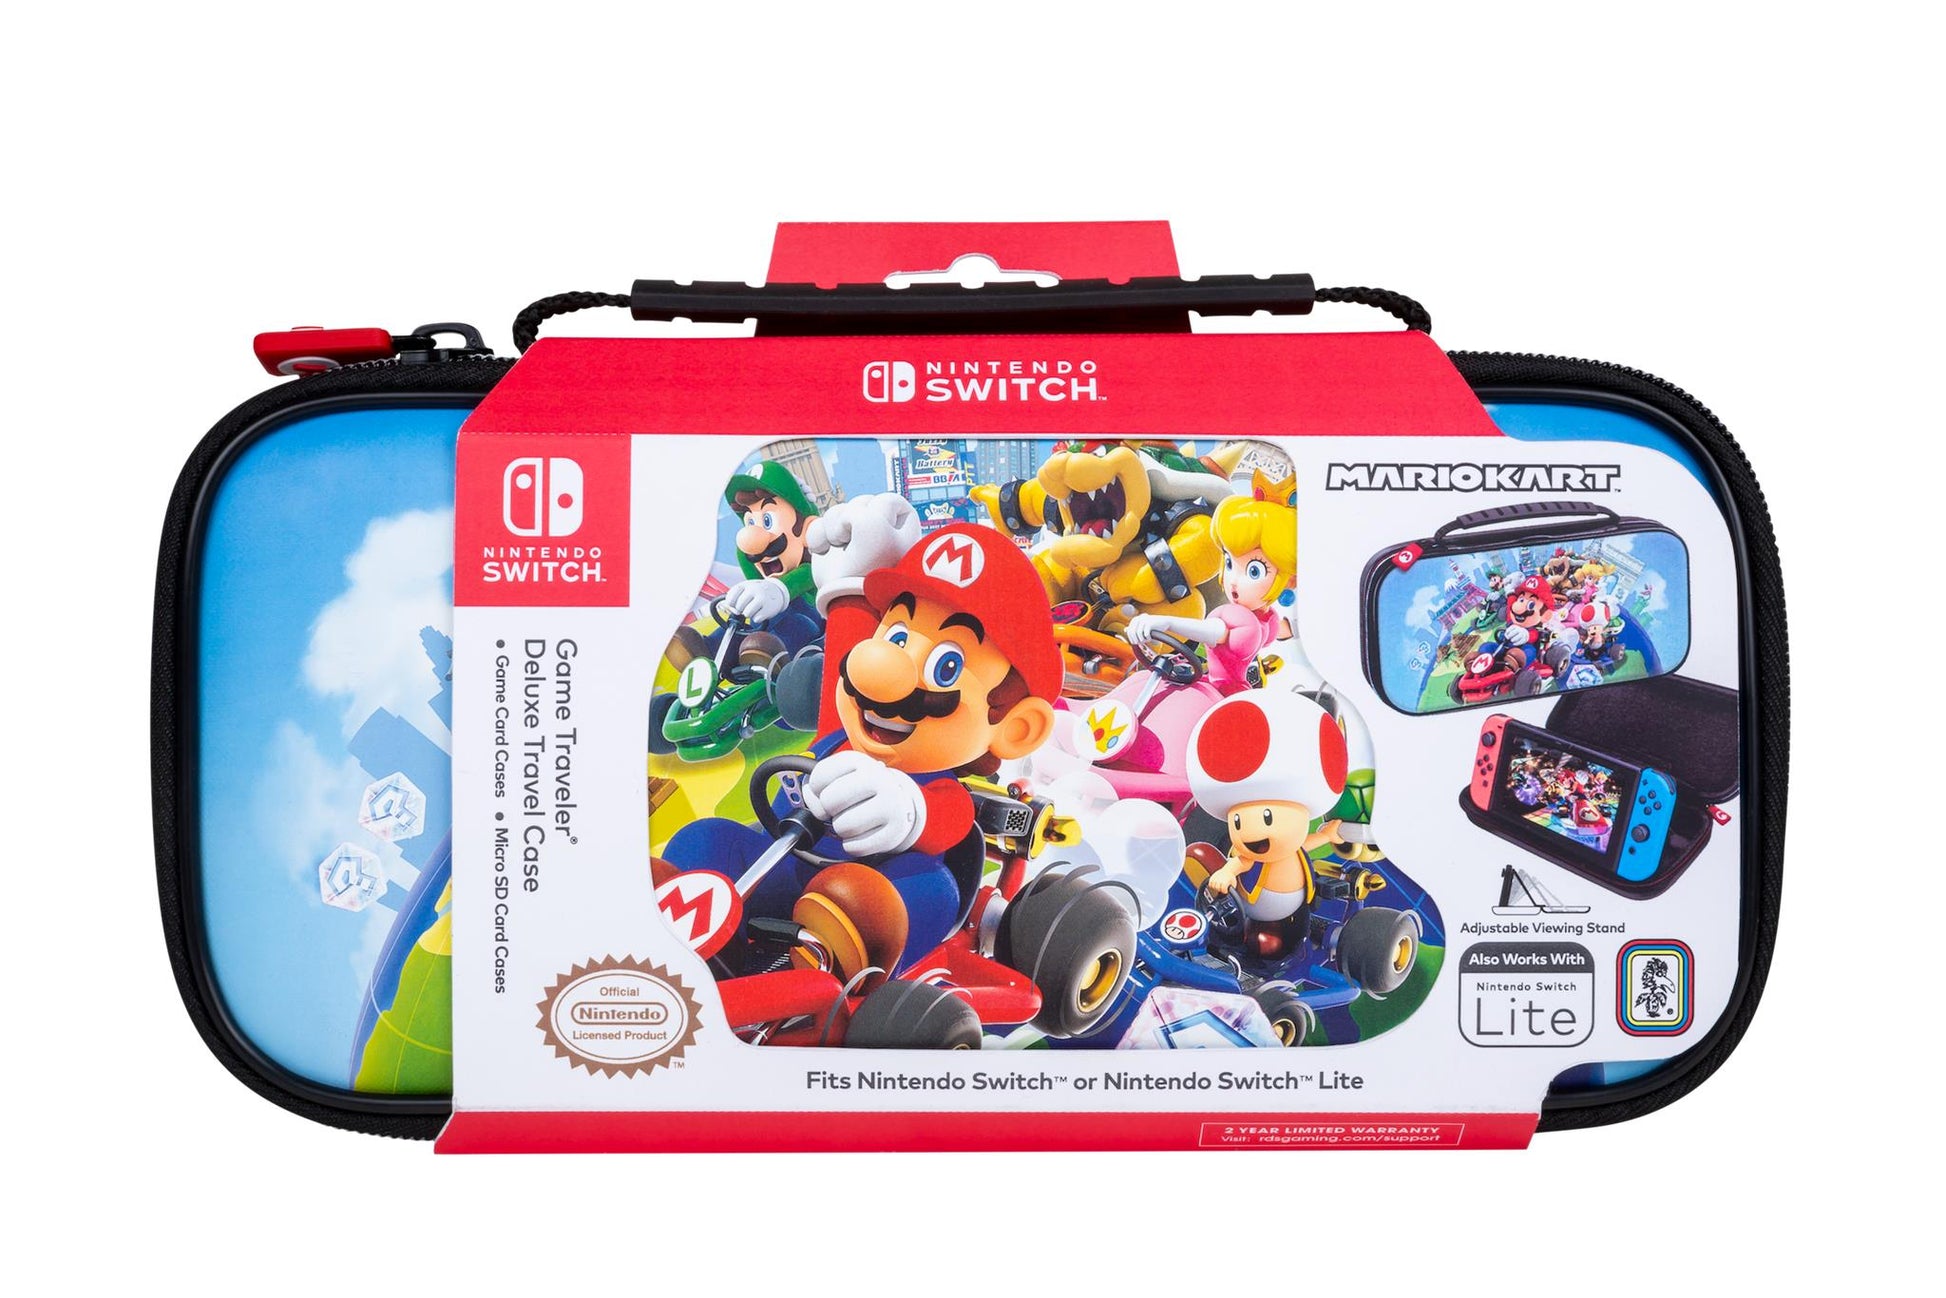 Official Mario Kart World Case for Nintendo Switch